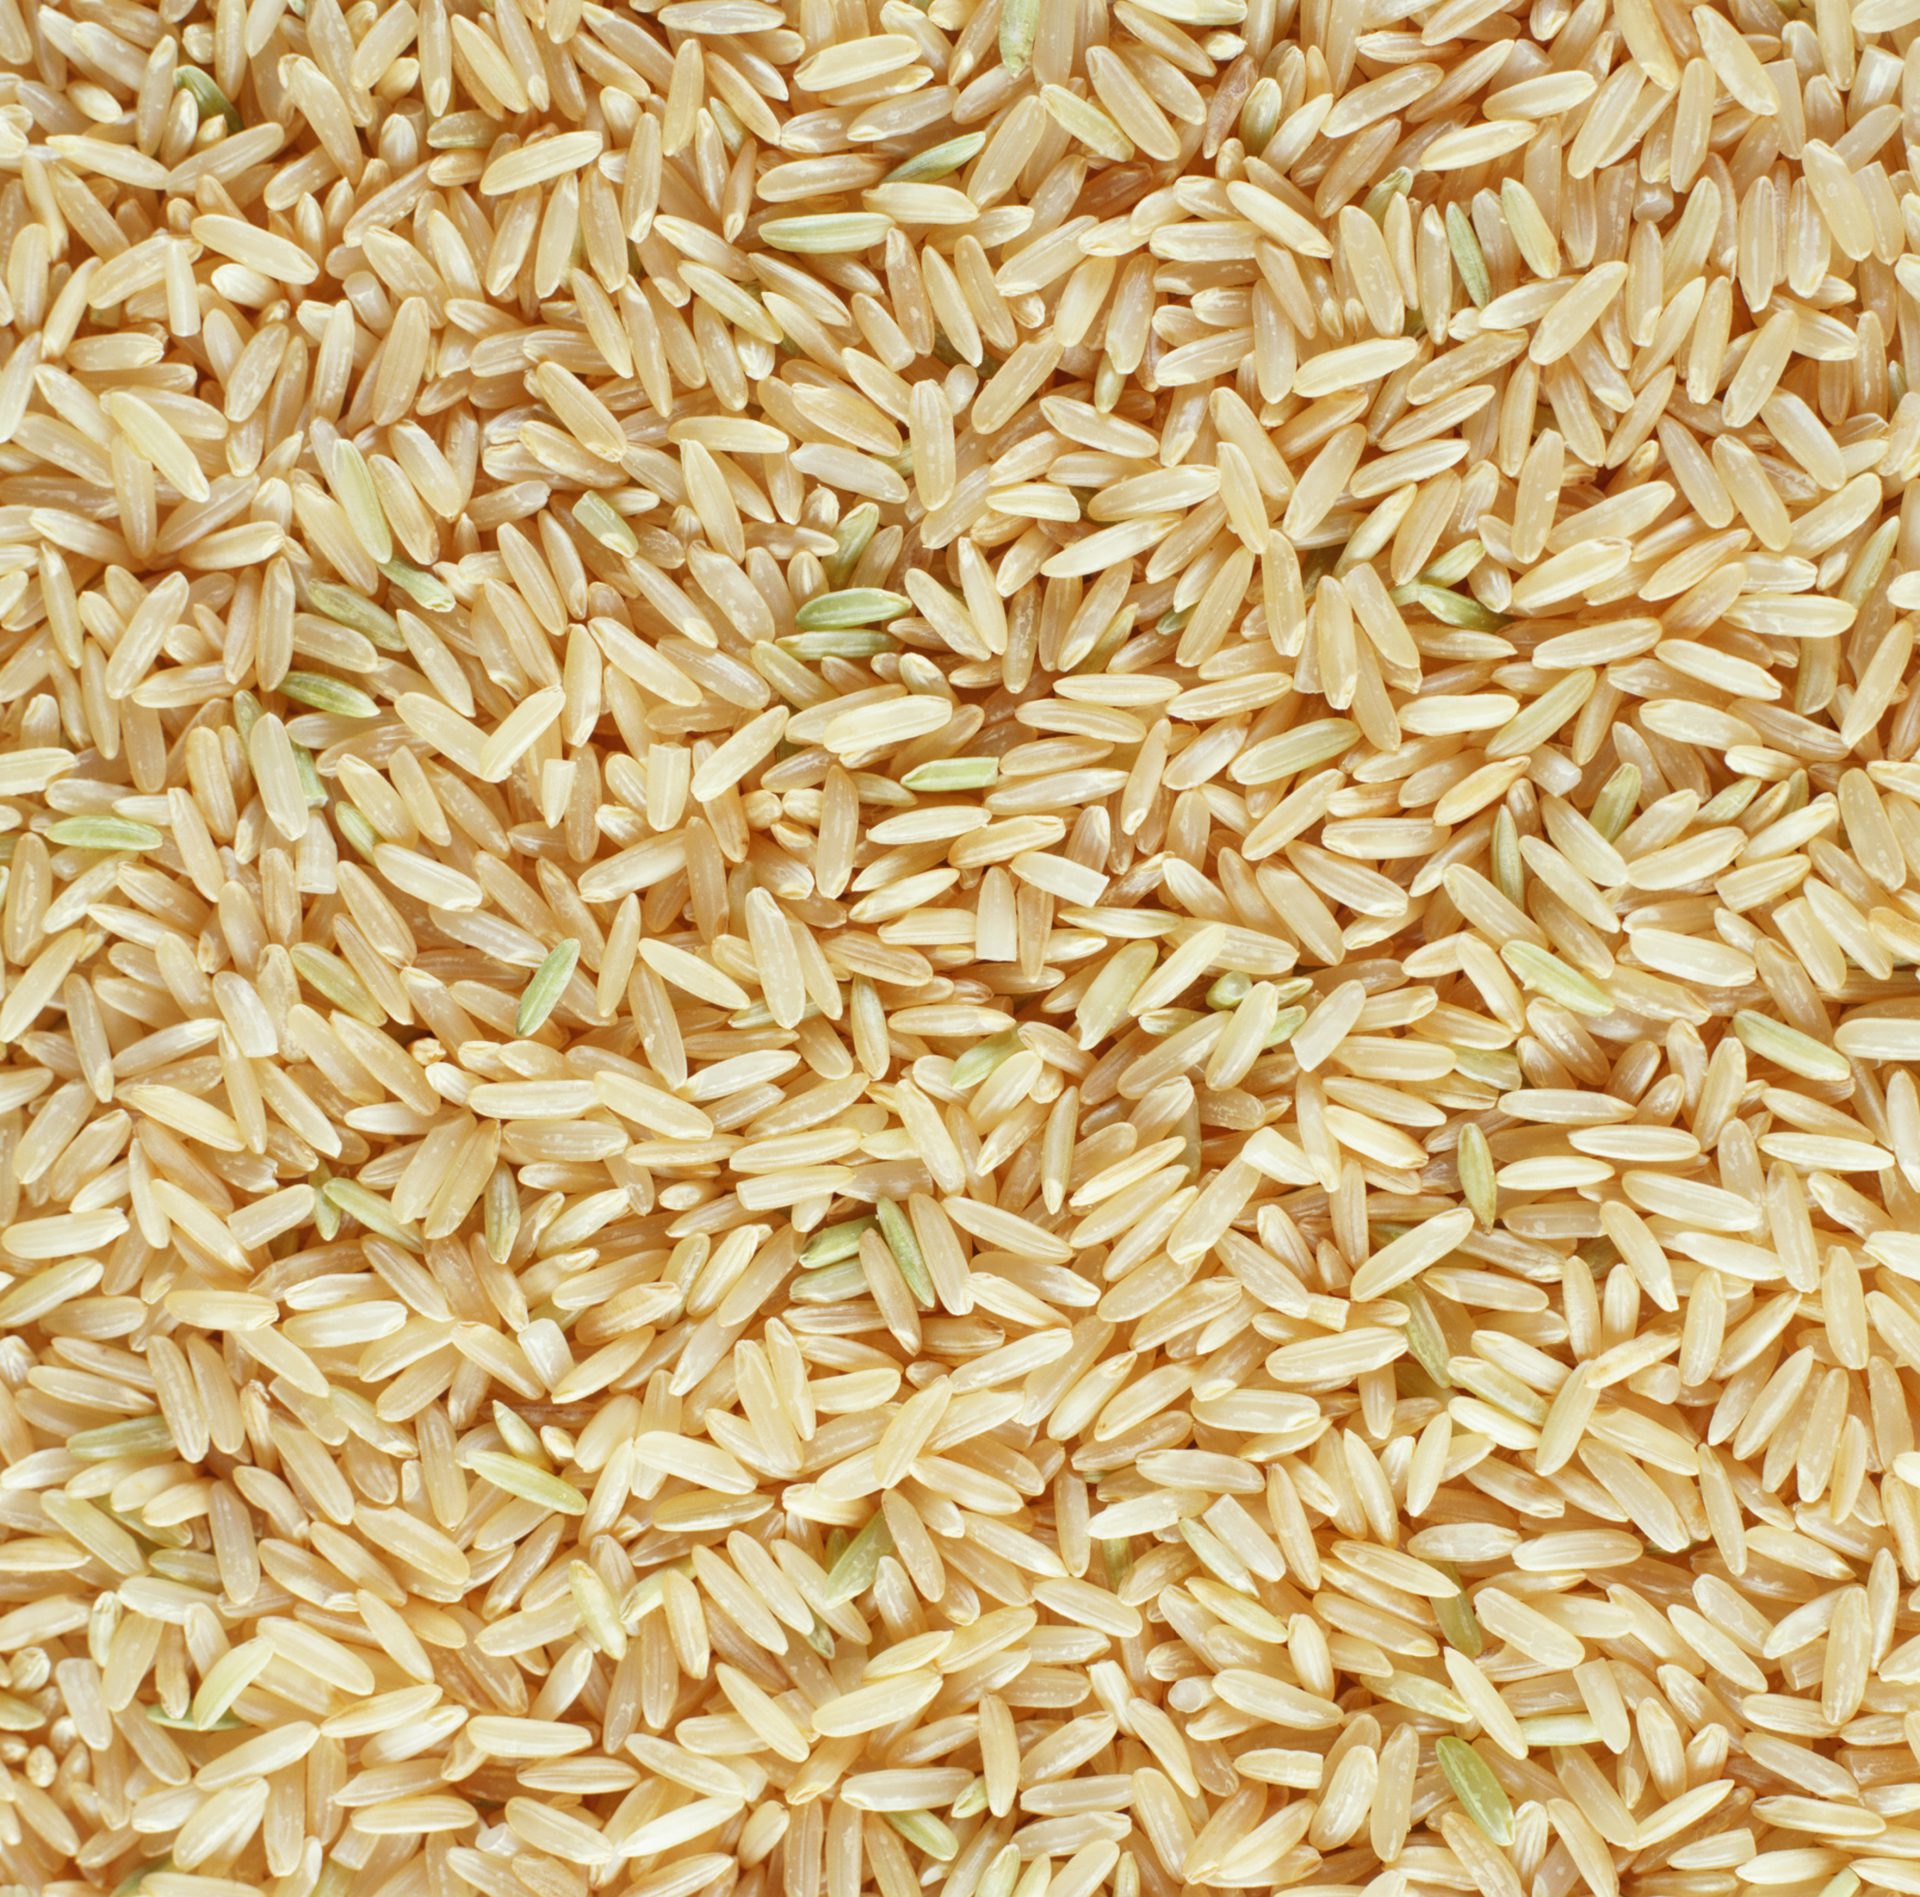 What Are the Benefits of Whole Grain Rice? | LIVESTRONG.COM